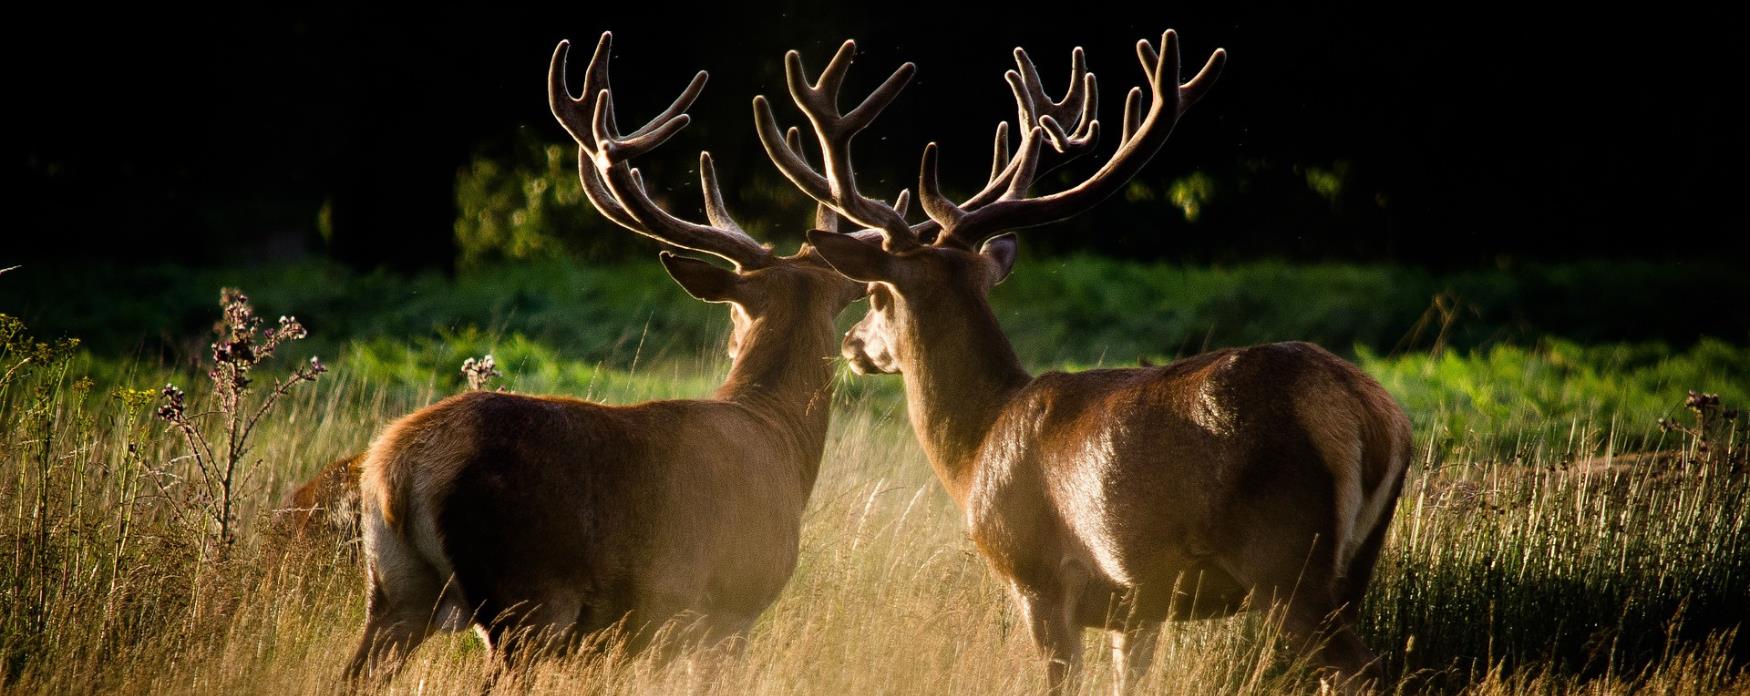 An image of two dears in Richmond Park